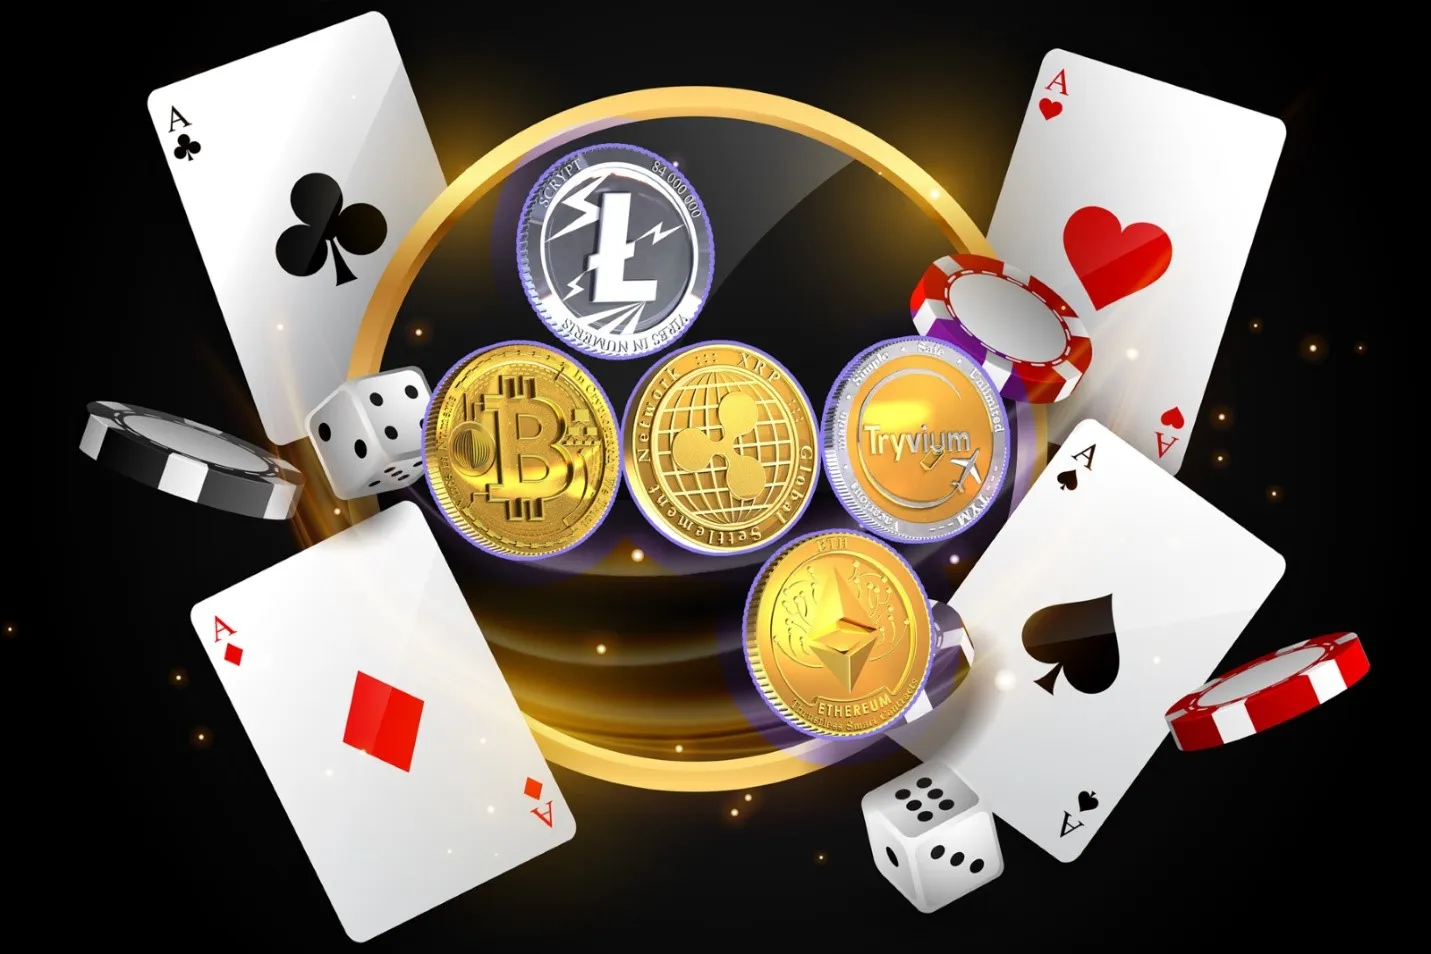 Cryptocurrency casinos